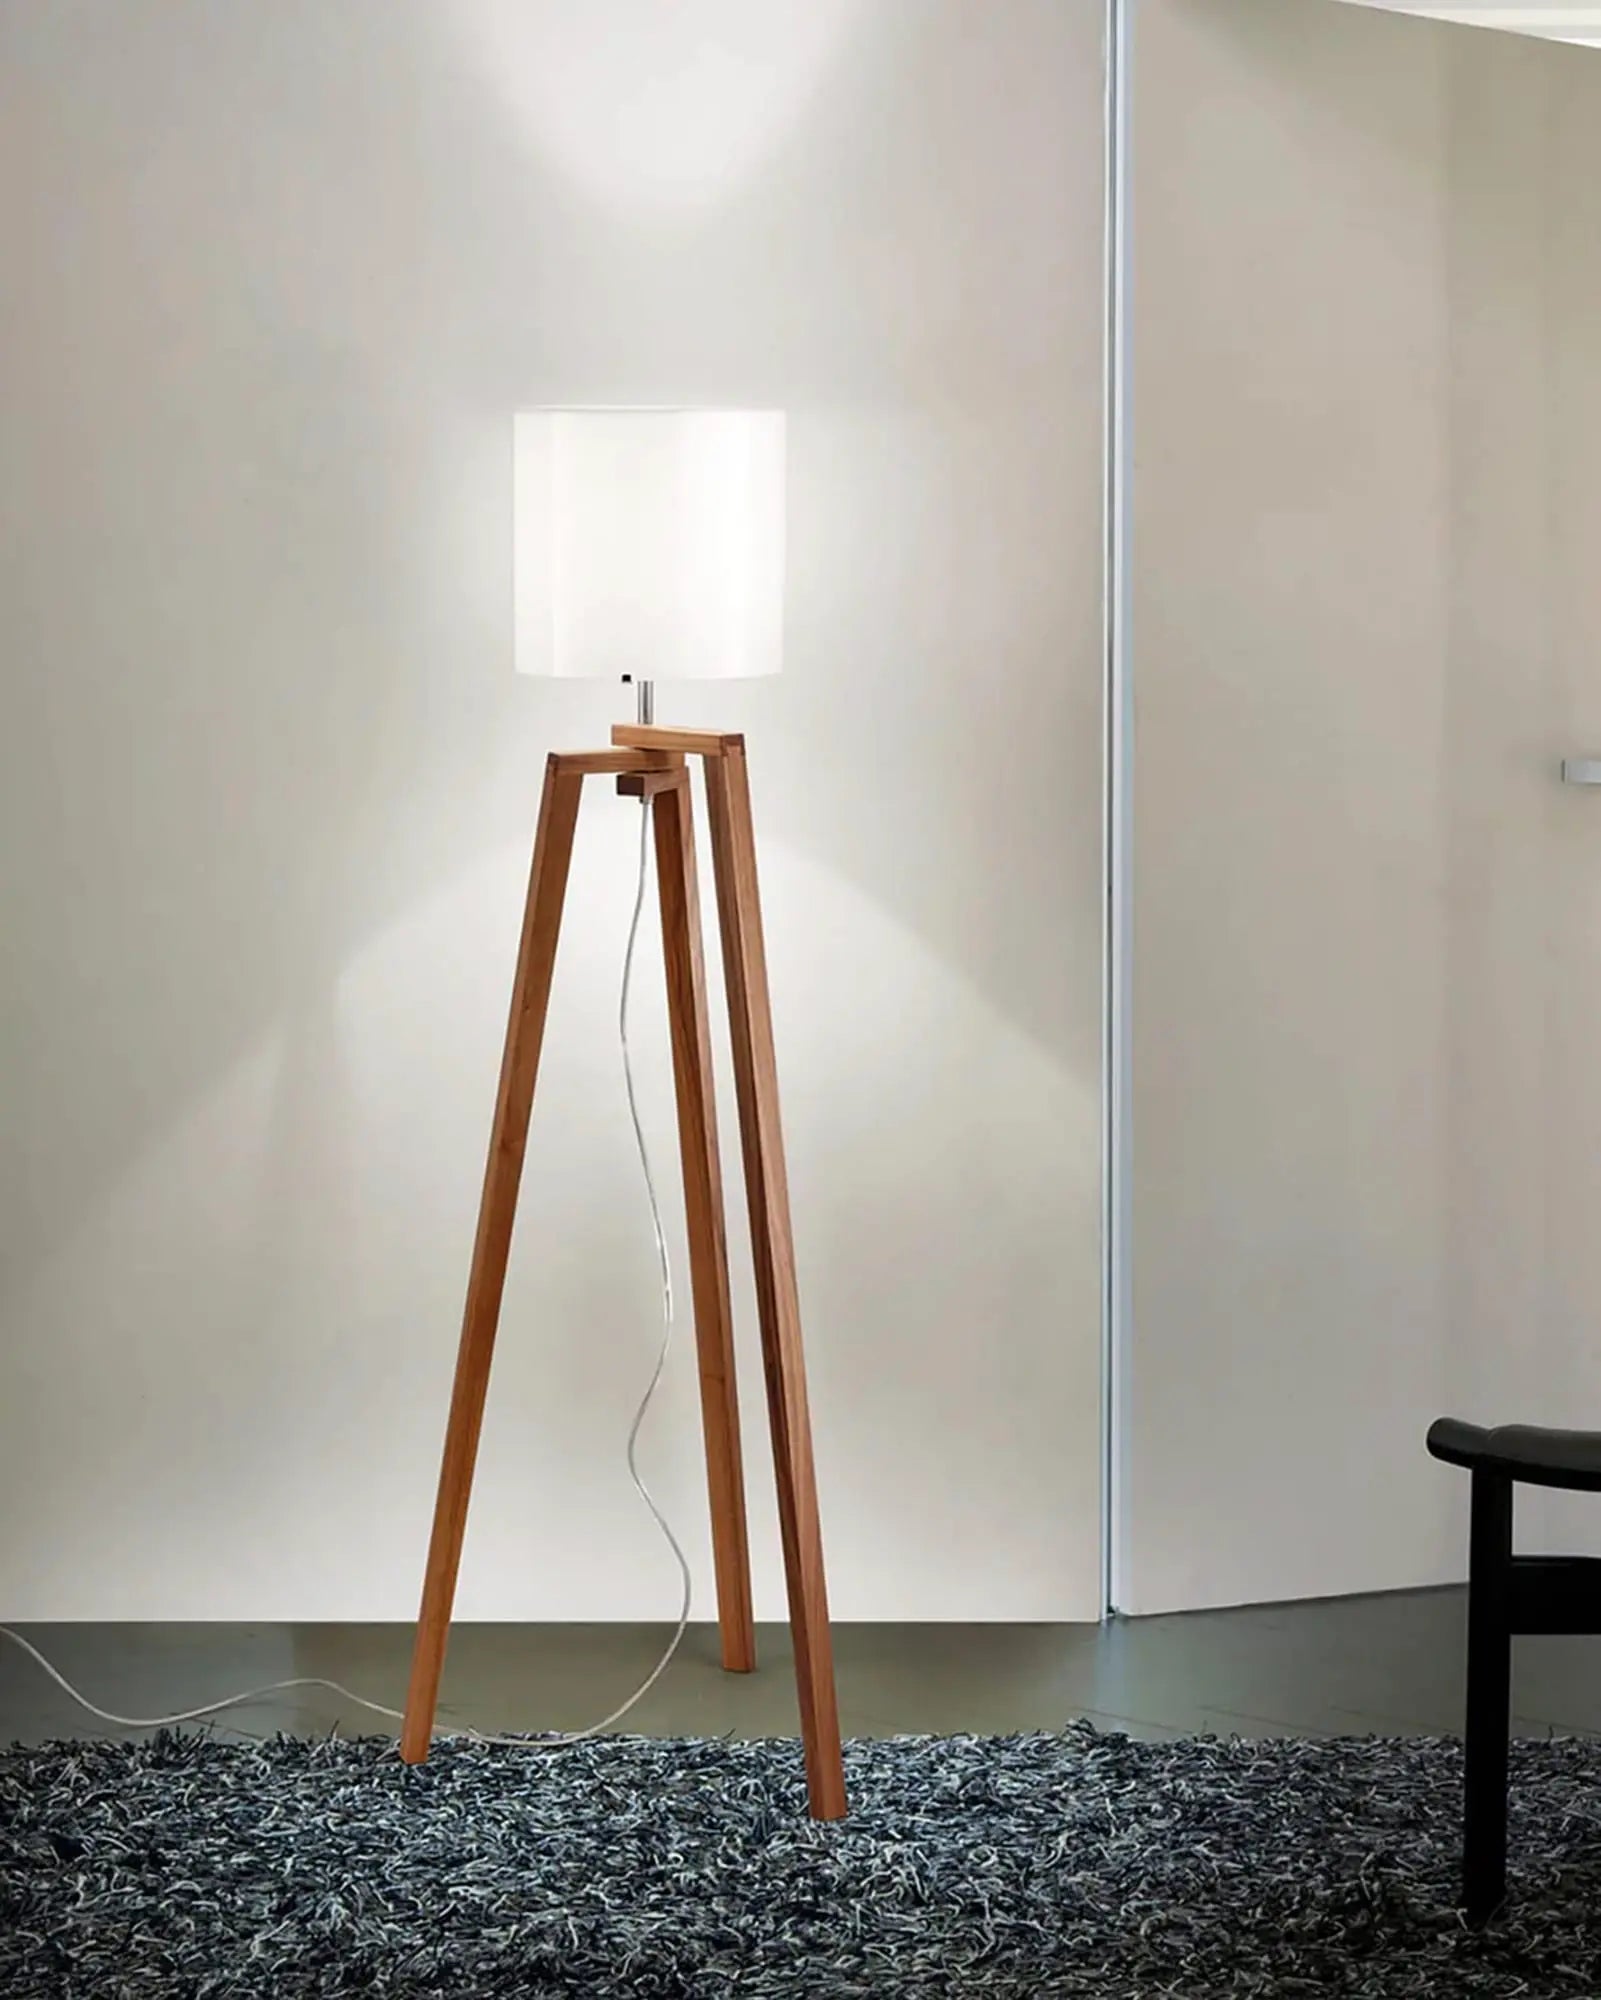 Trepai timber and glass contemporary floor lamp in a bedroom